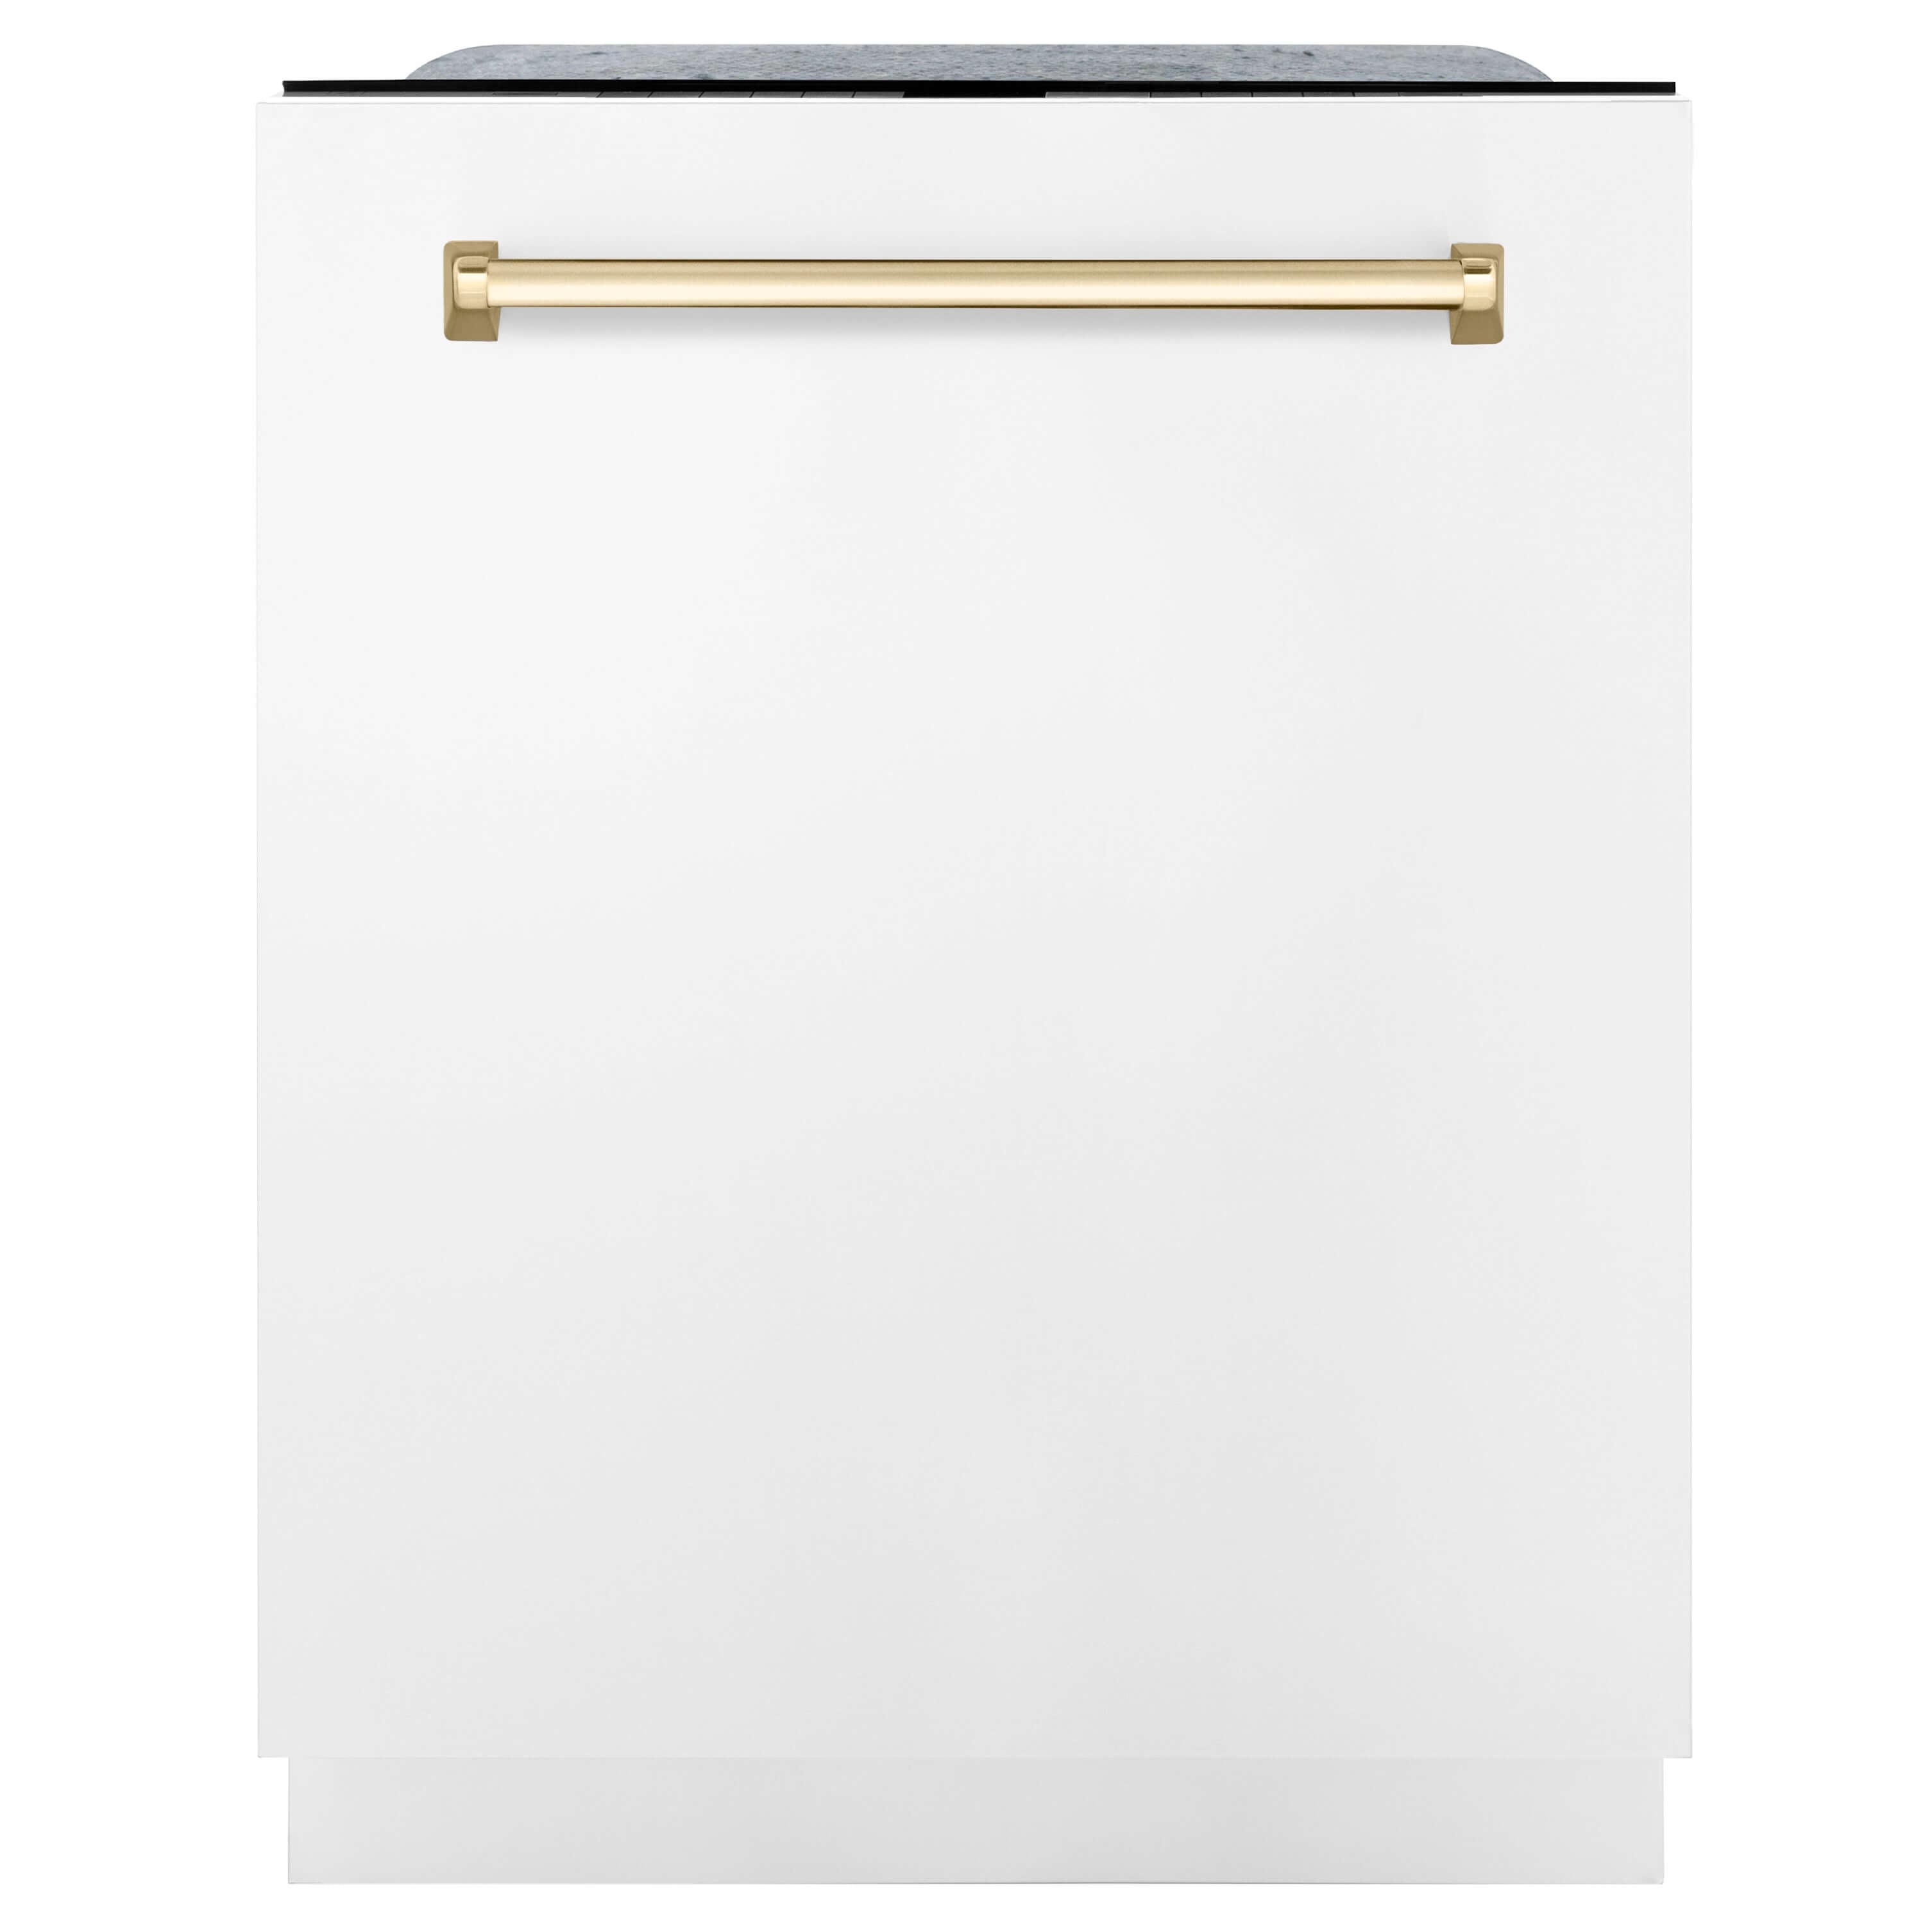 ZLINE 48 in. Autograph Edition Kitchen Package with Stainless Steel Dual Fuel Range with White Matte Door, Range Hood and Dishwasher with Polished Gold Accents (3AKP-RAWMRHDWM48-G)